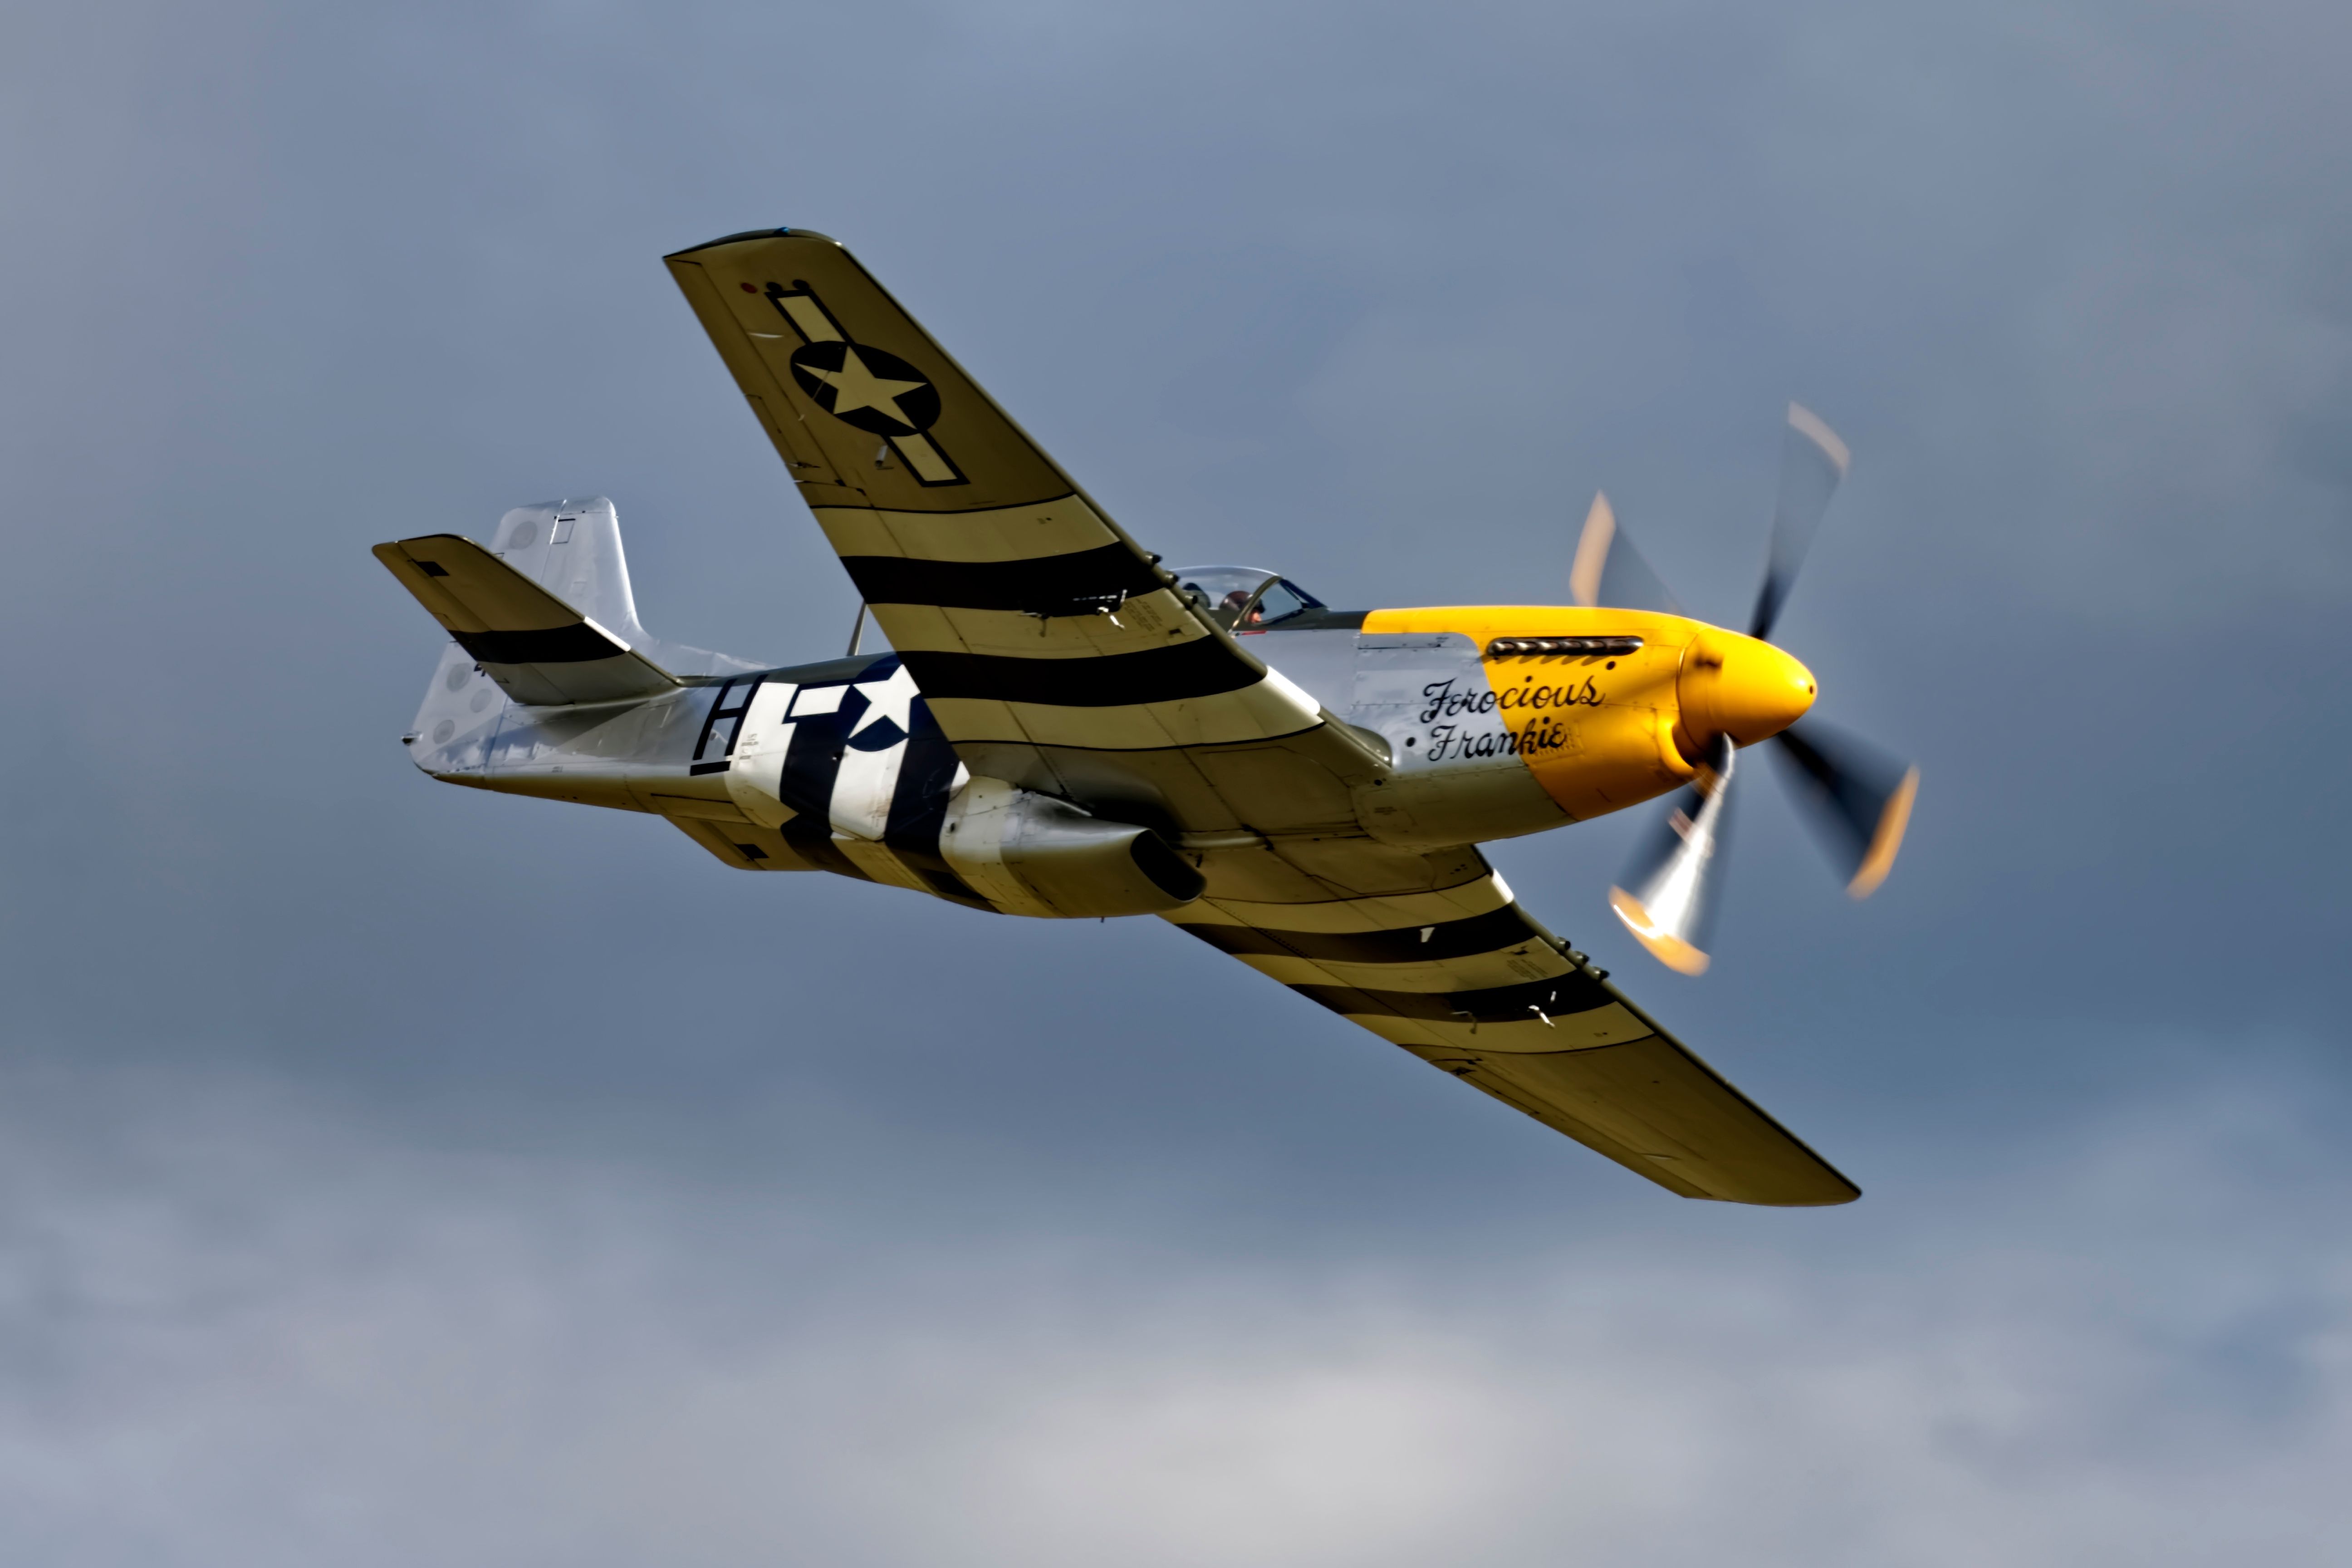 A North American P-51D Mustang 'Ferocious Frankie' flying in the sky.